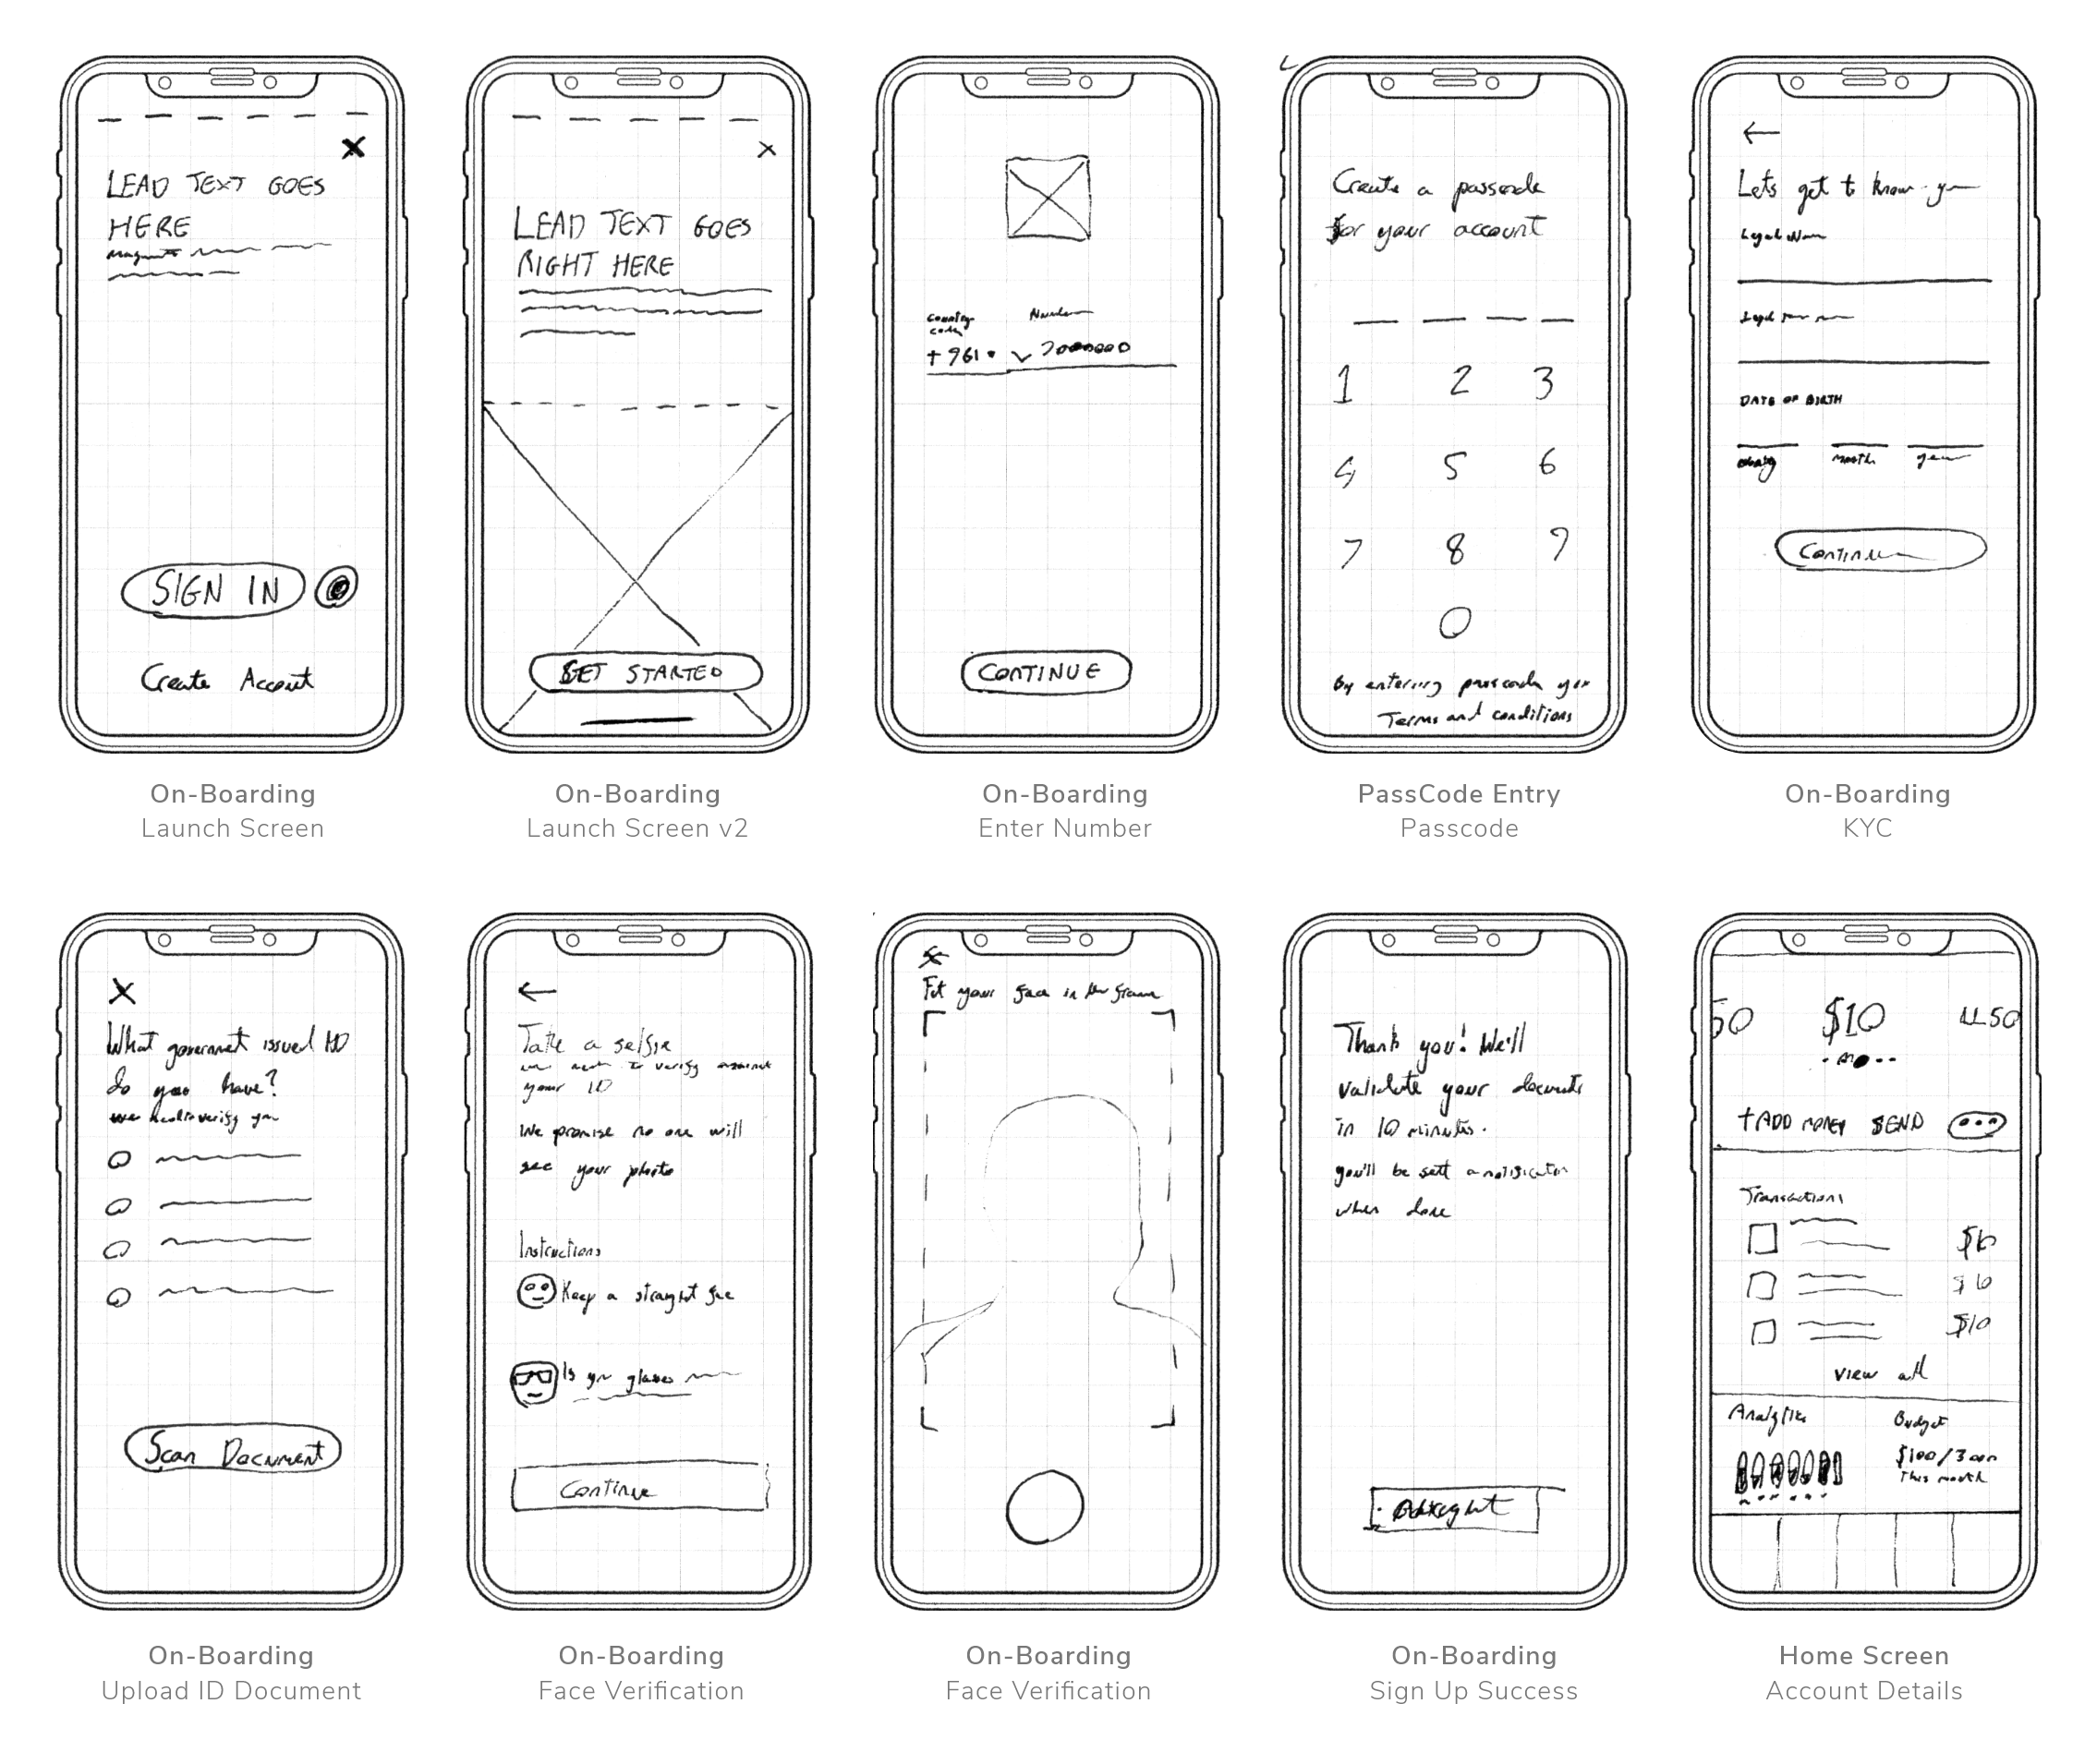 Initial UX wireframes ideating the concept design process of the app